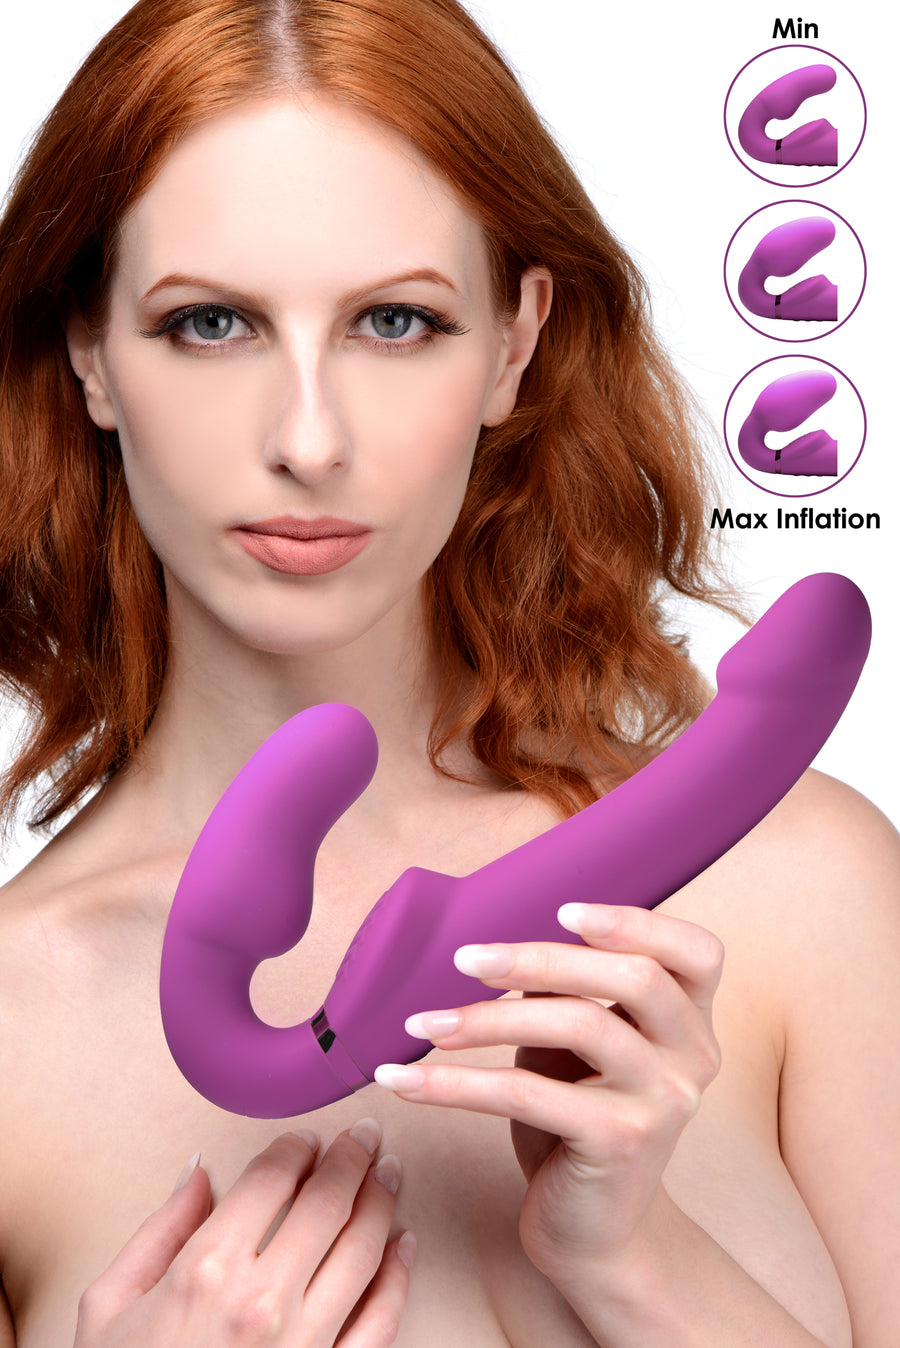 Worlds First Remote Control Inflatable Vibrating Silicone Ergo Fit Strapless Strap-On - AF935 - UPC-848518032300